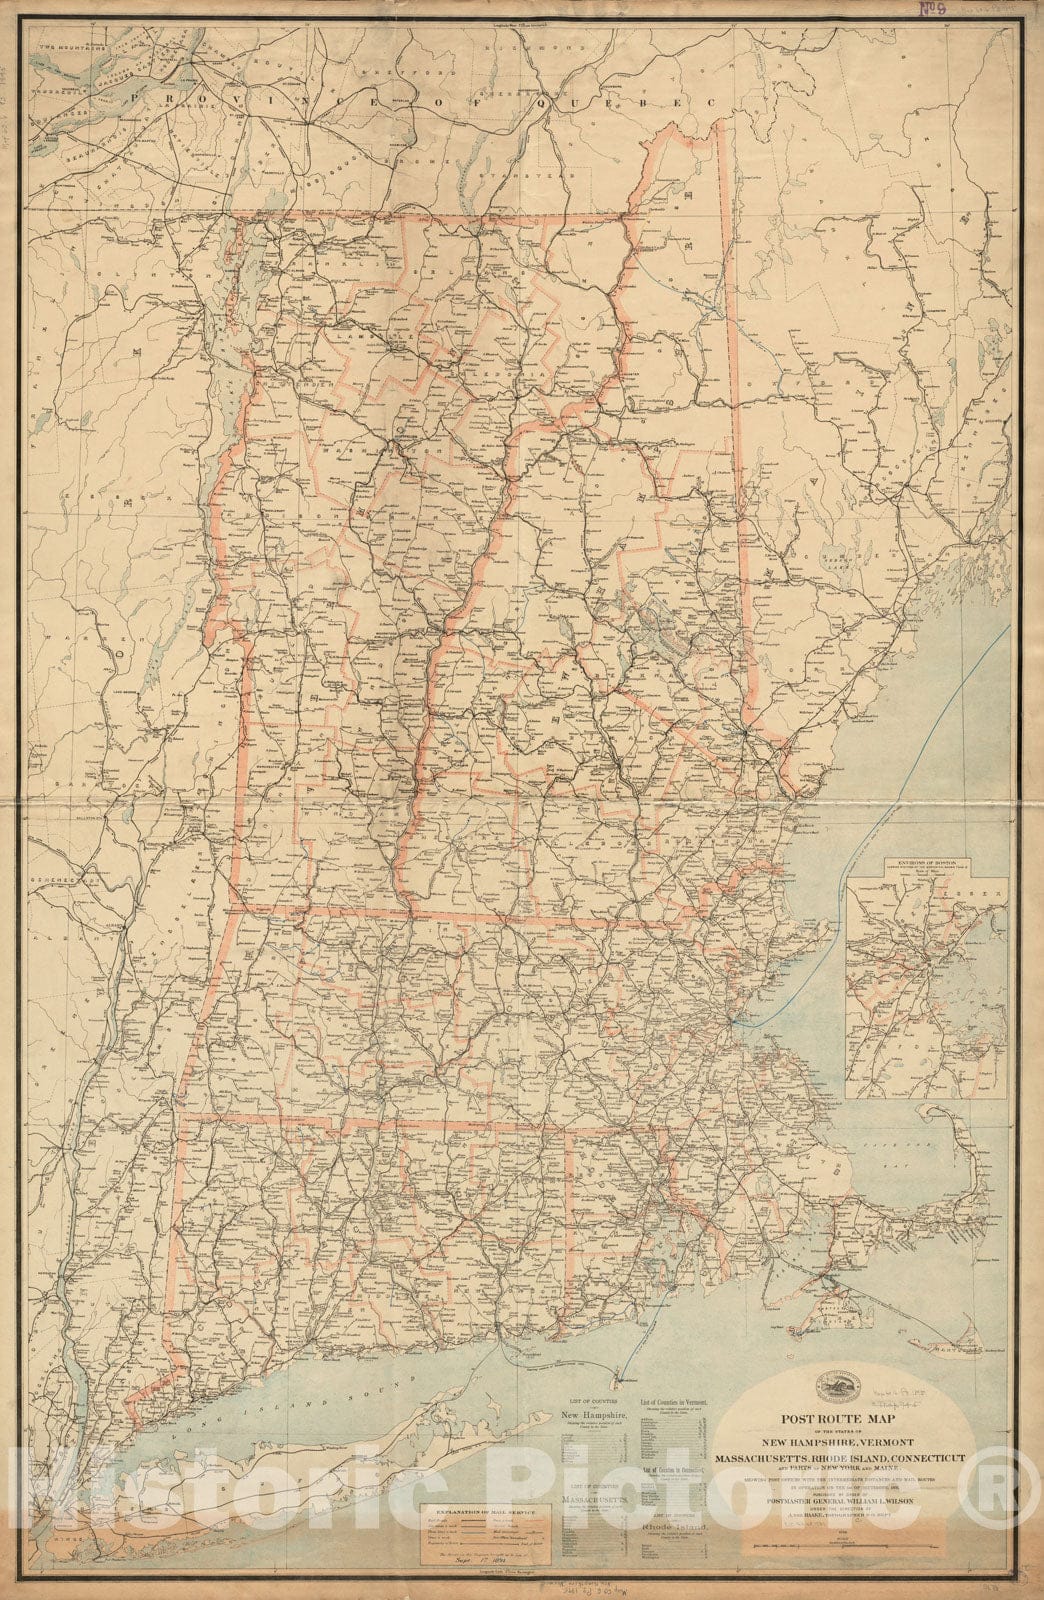 Historical Map, Post Route map of The States of New Hampshire, Vermont, Massachusetts, Rhode Island, Connecticut and Parts of New York and Maine : Showing Post Office, Vintage Wall Art